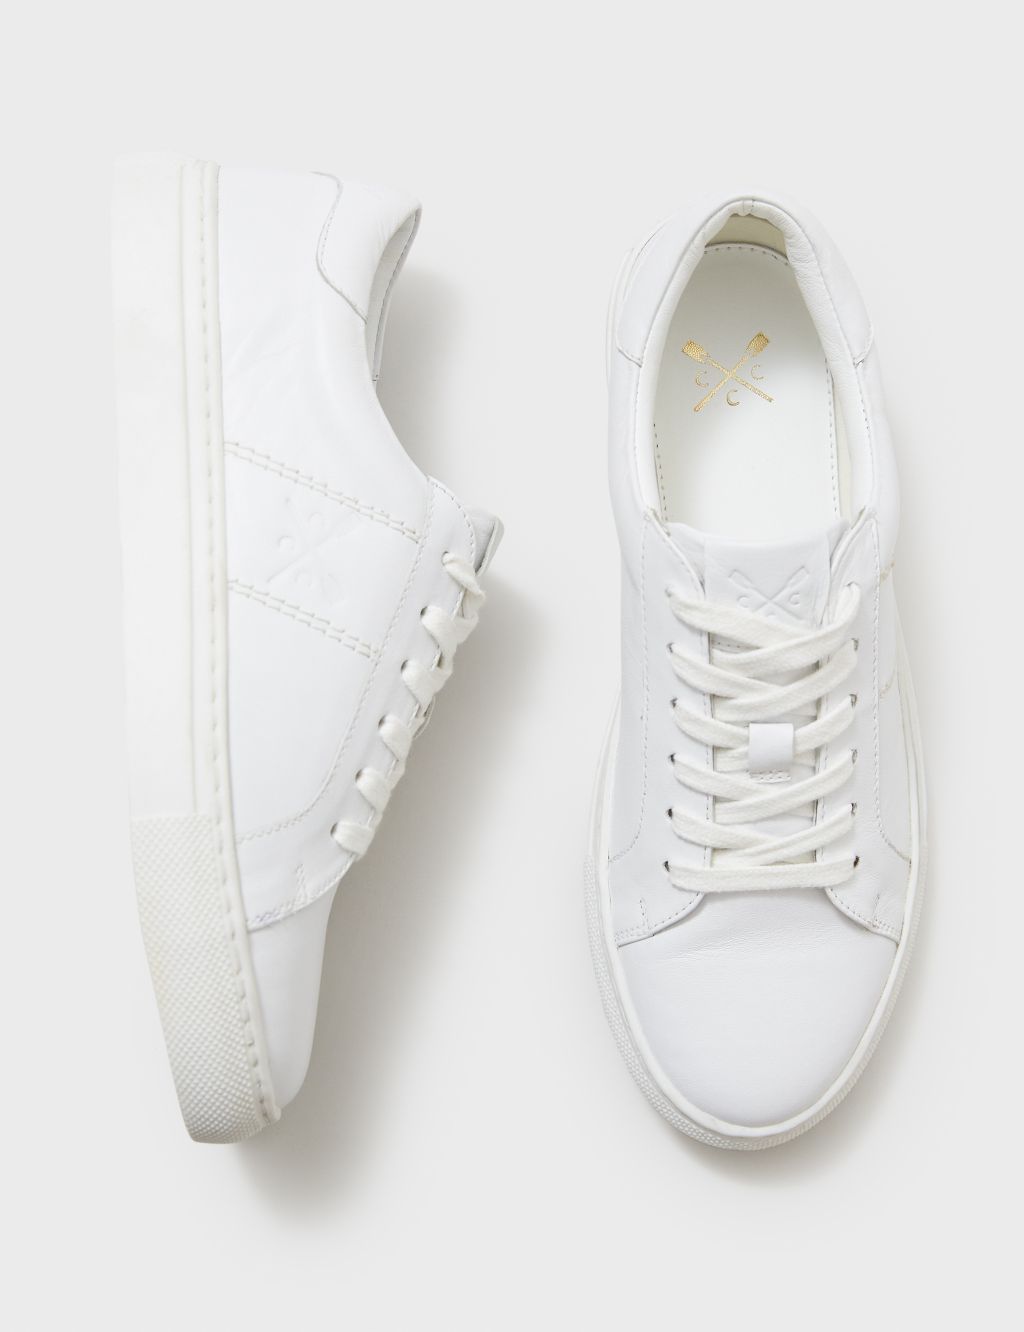 Leather Lace Up Trainers | Crew Clothing | M&S